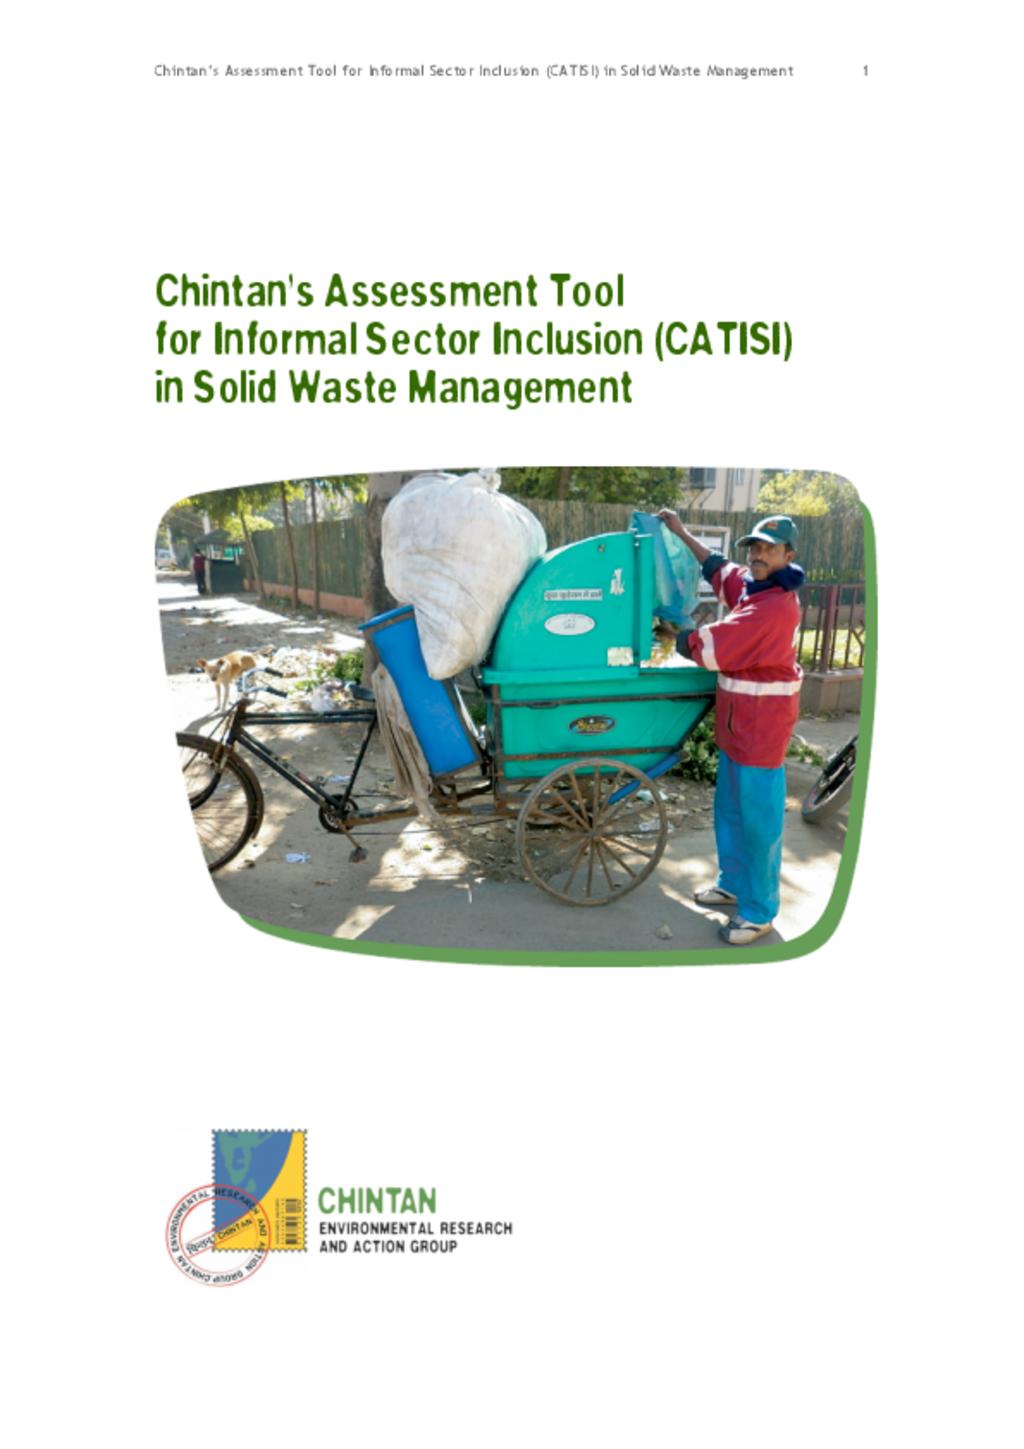 Chintan's Assessment Tool for Informal Sector Inclusion in SWM